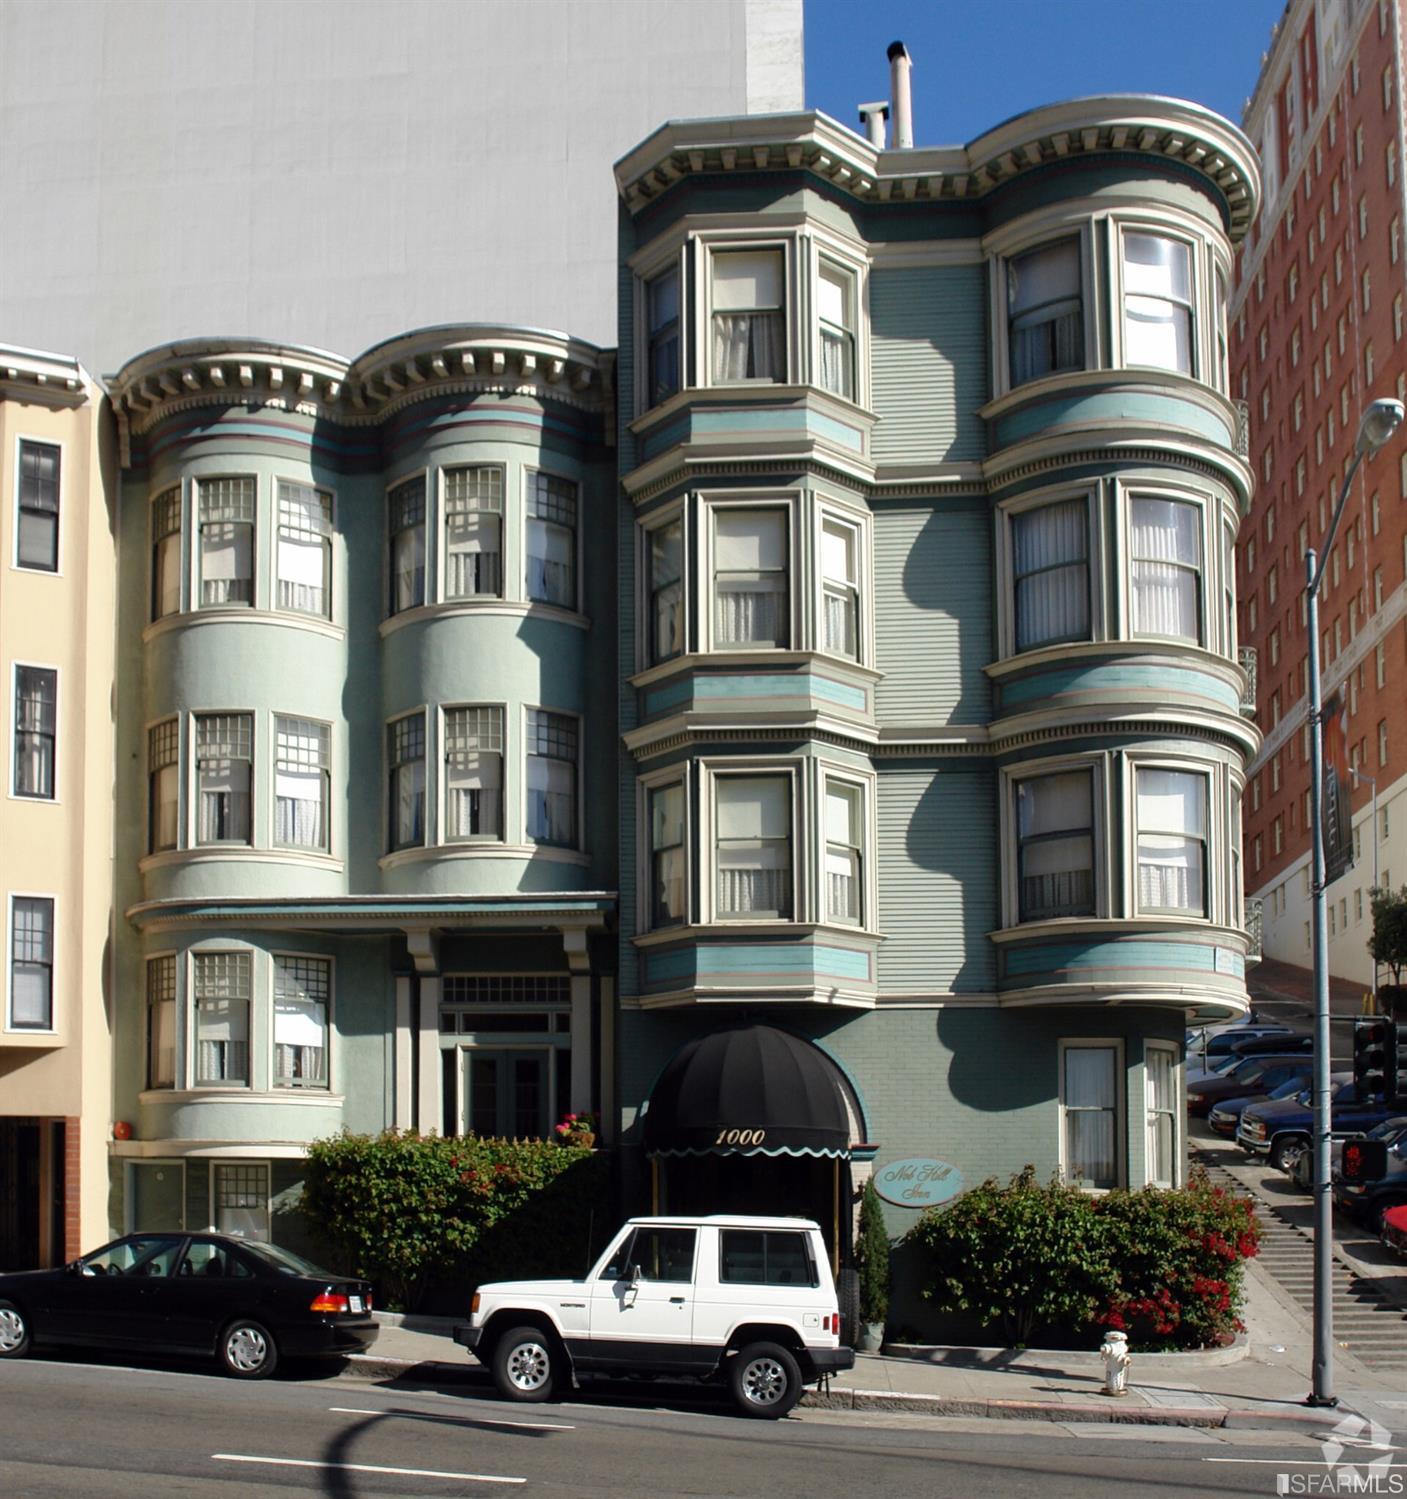 Photo of 1000 Pine St in San Francisco, CA